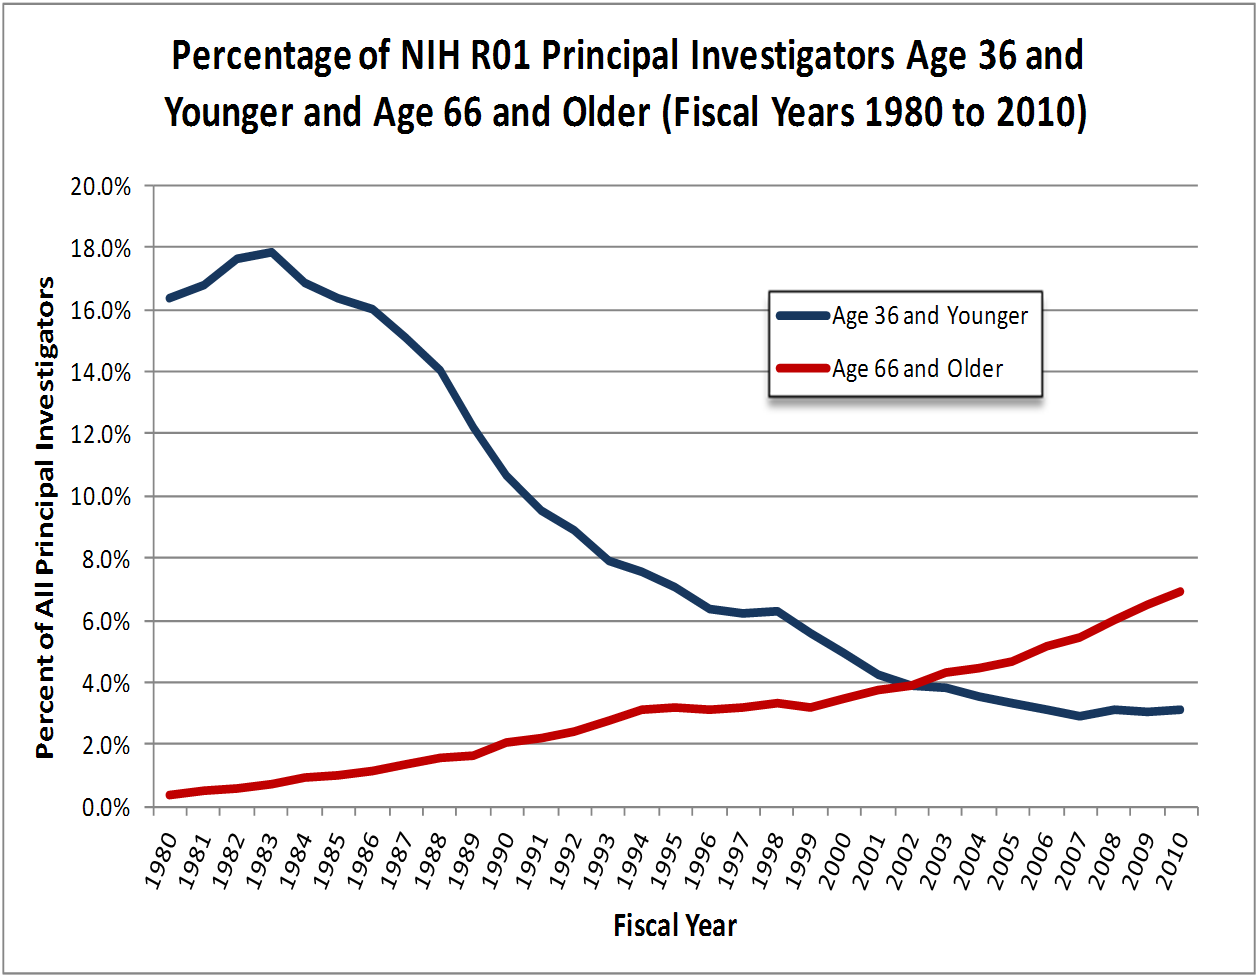 Percentage of R01 investigators age 36 and younger and 66 and older 1980-2010. 